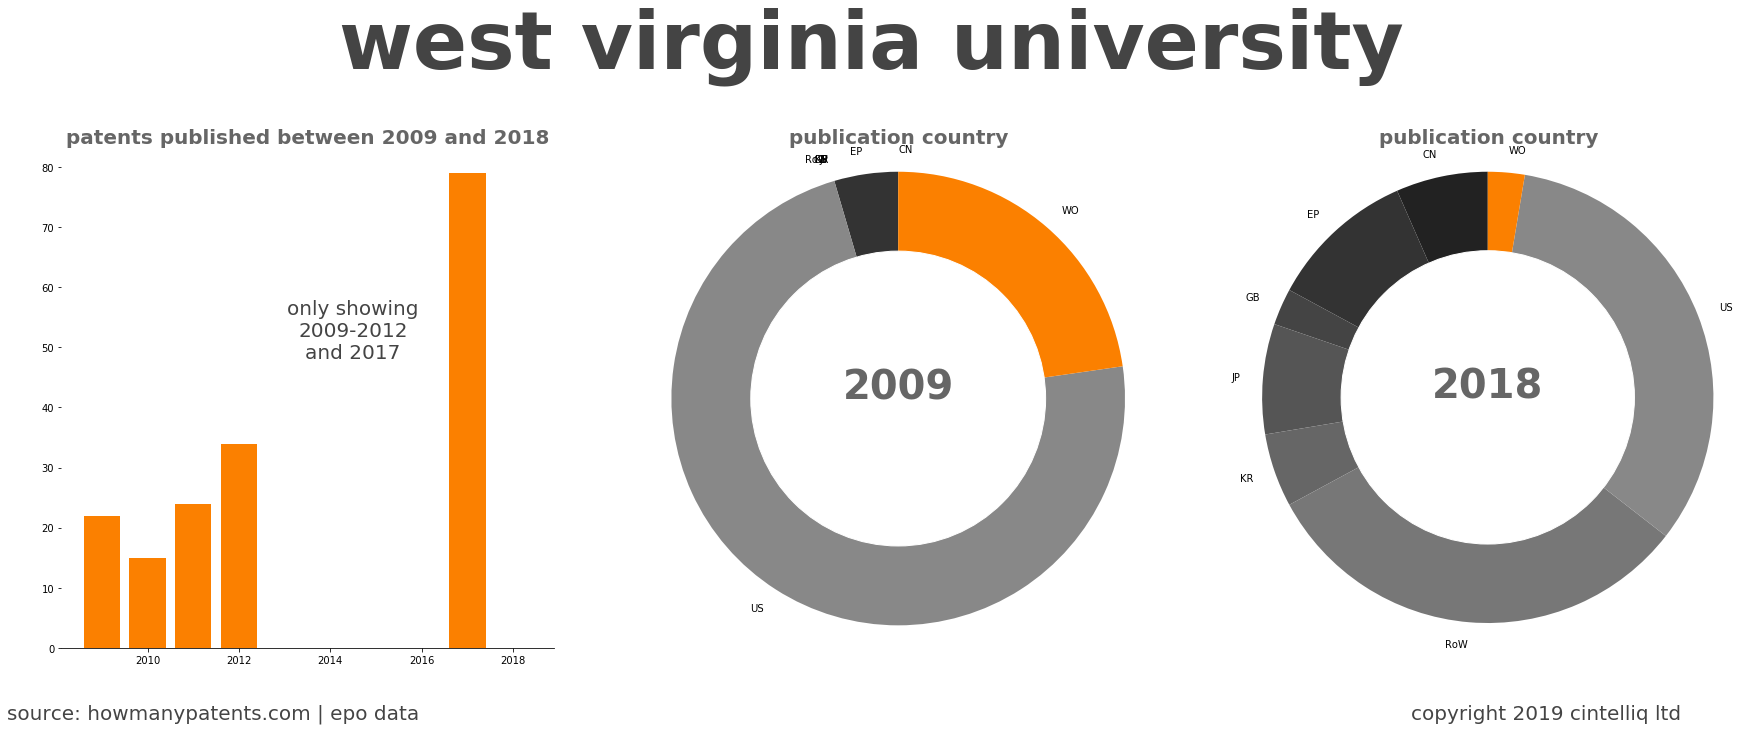 summary of patents for West Virginia University